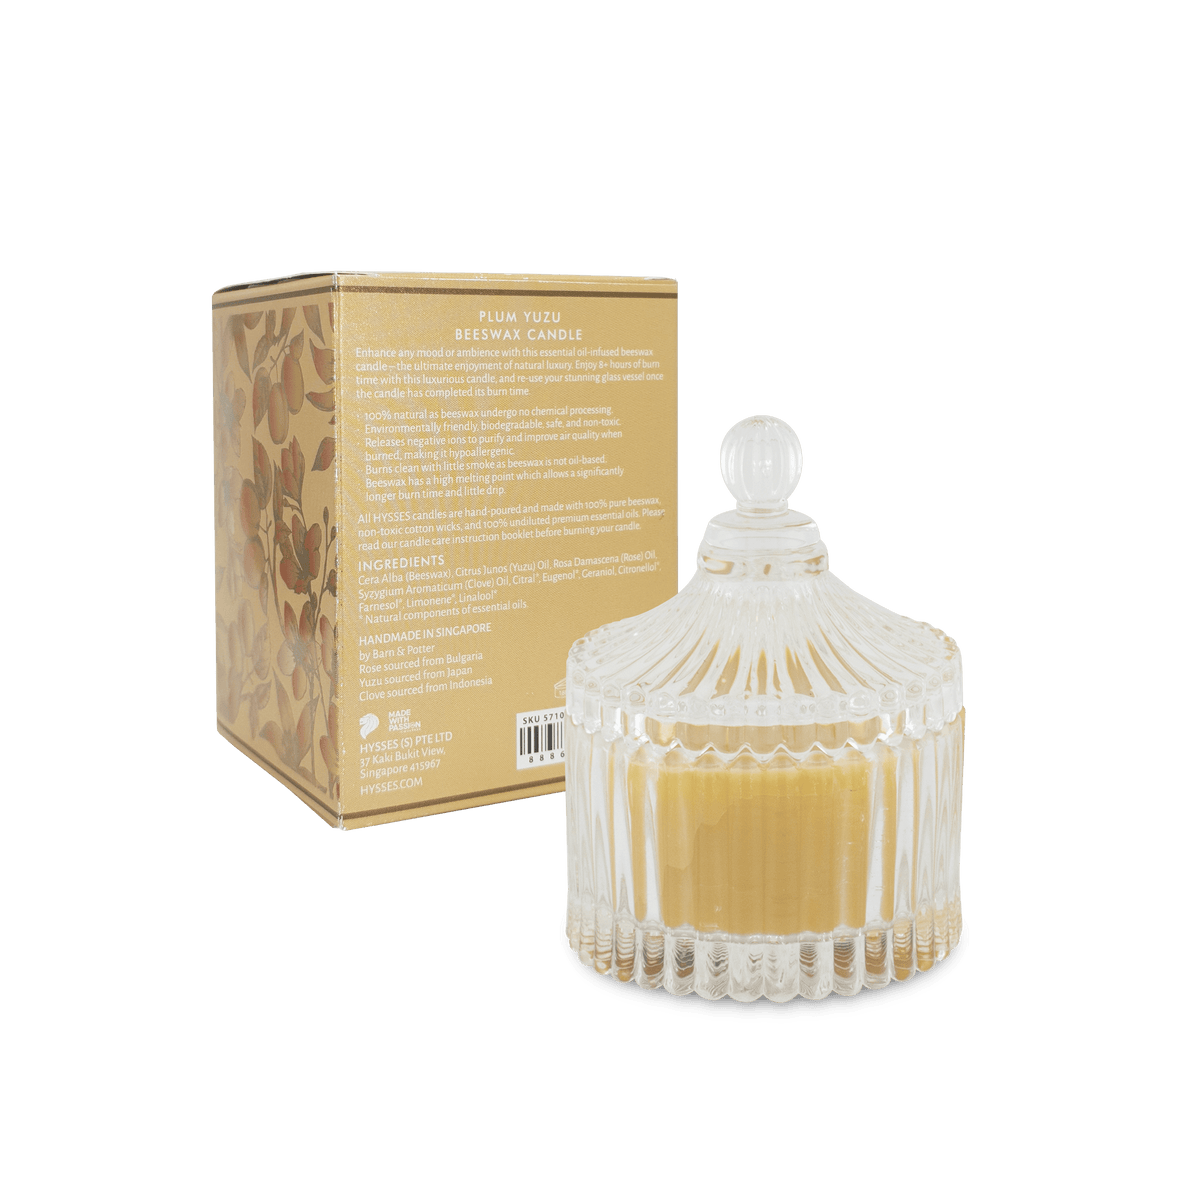 Hysses Home Scents Beeswax Candle Plum Yuzu